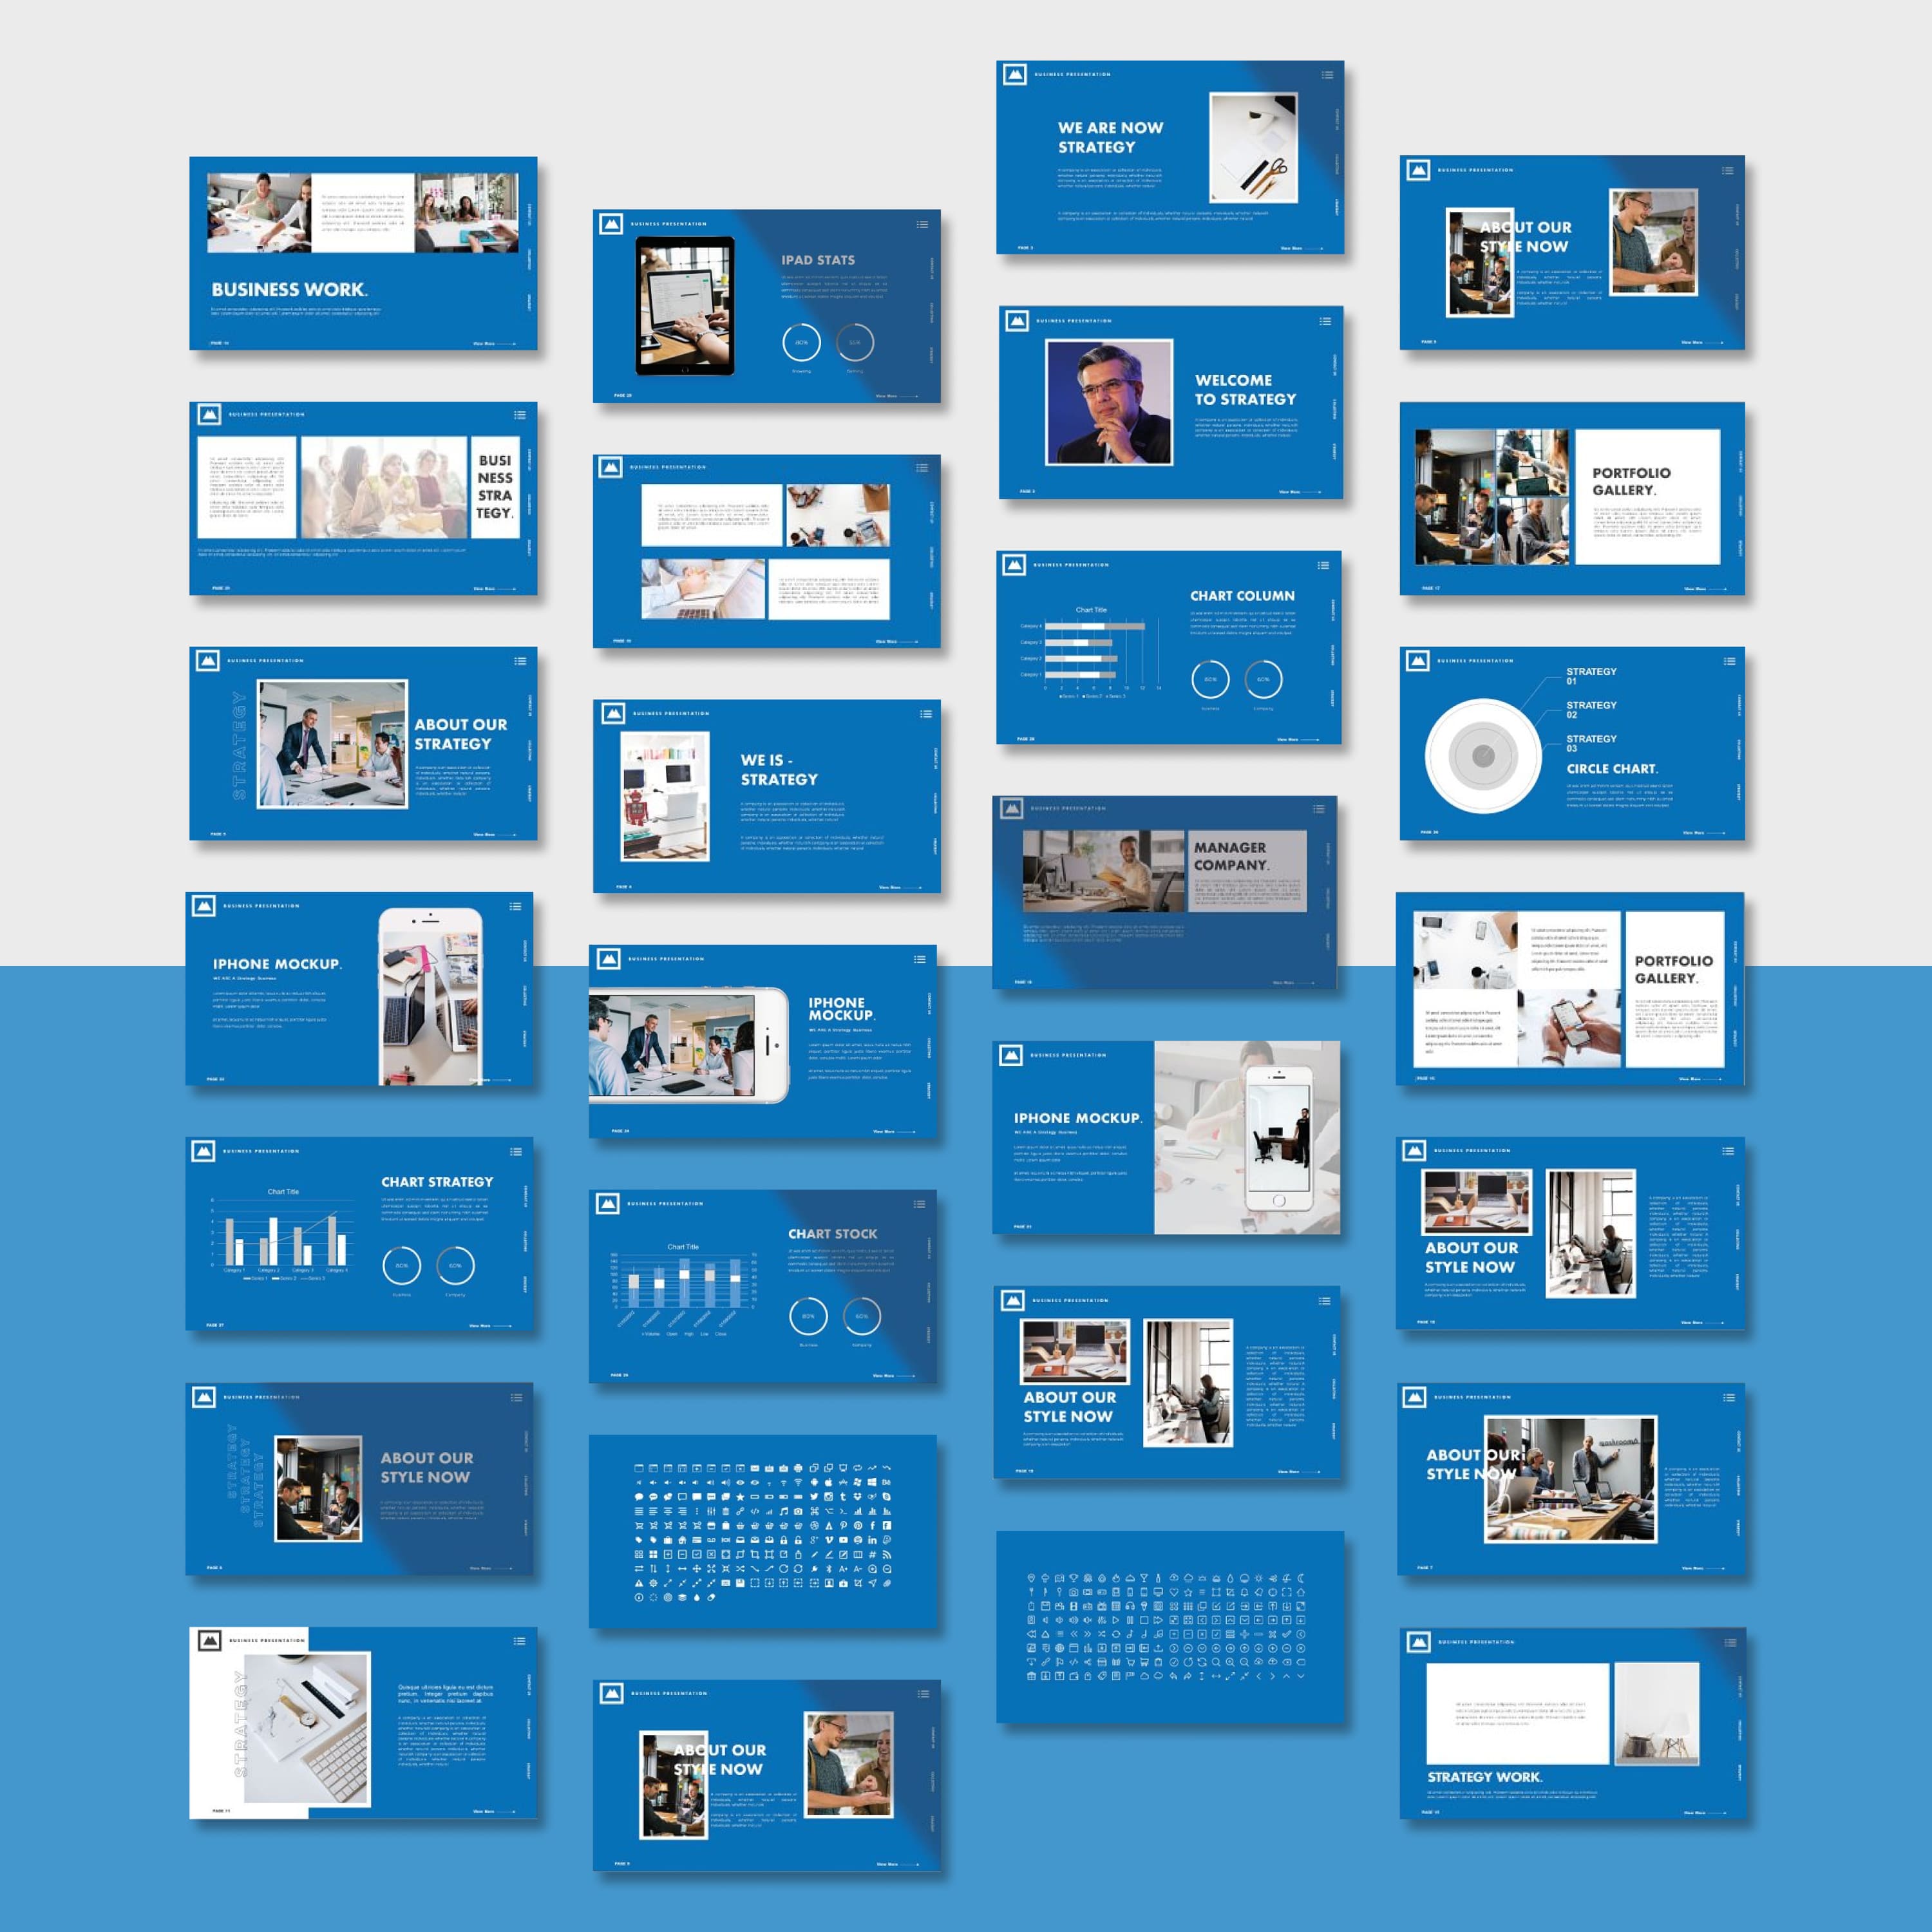 STRATEGY - Business Keynote Template created by Barland Design.